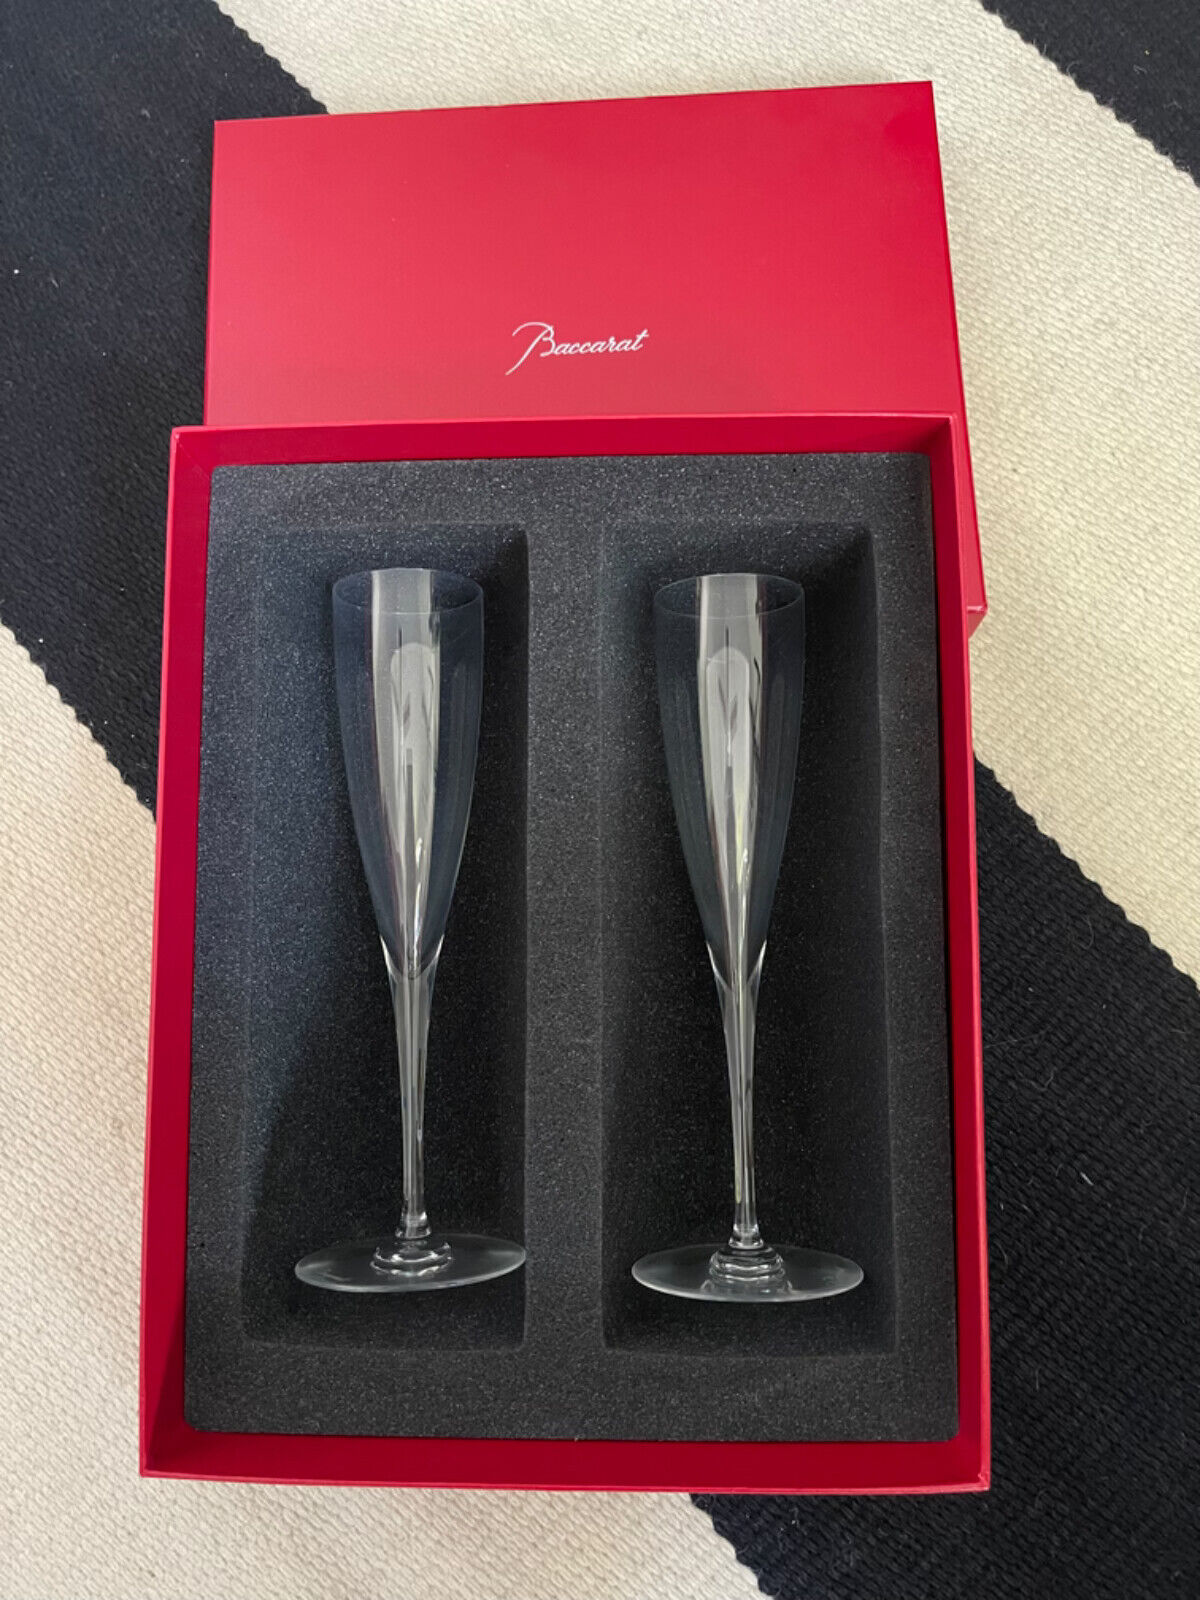 NEW in BOX FLAWLESS Exceptional BACCARAT DOM PÉRIGNON Crystal Pair FLUTES